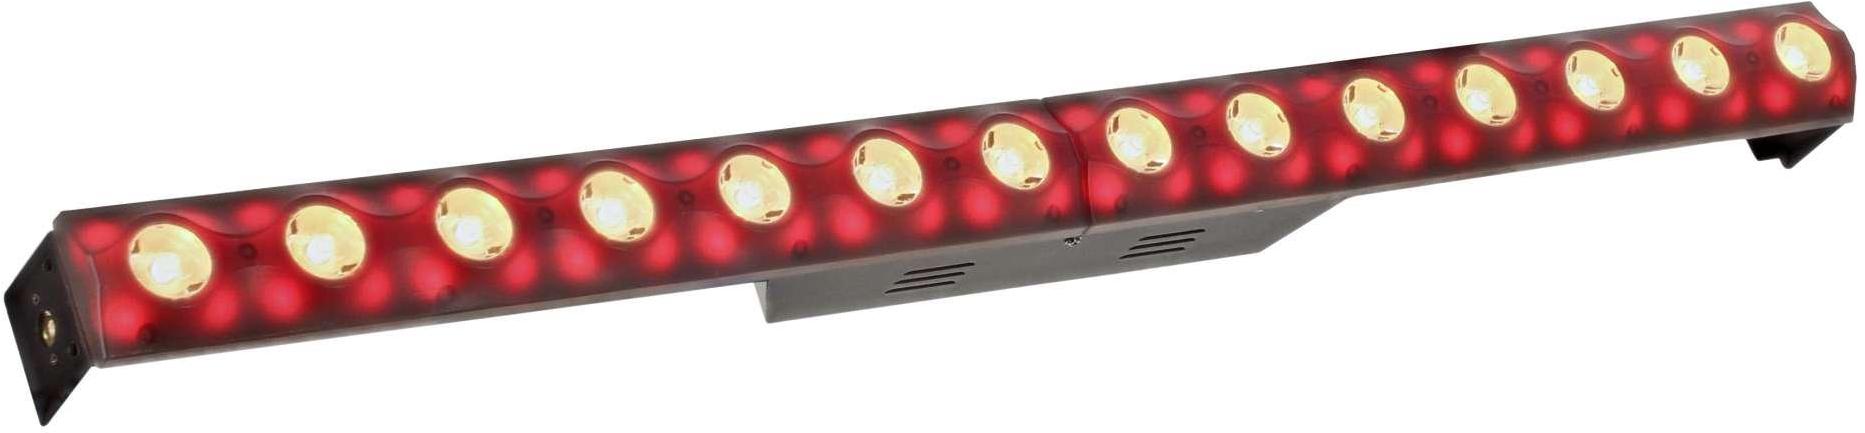 Led staaf  Power lighting barre Led 14x3 Crystal